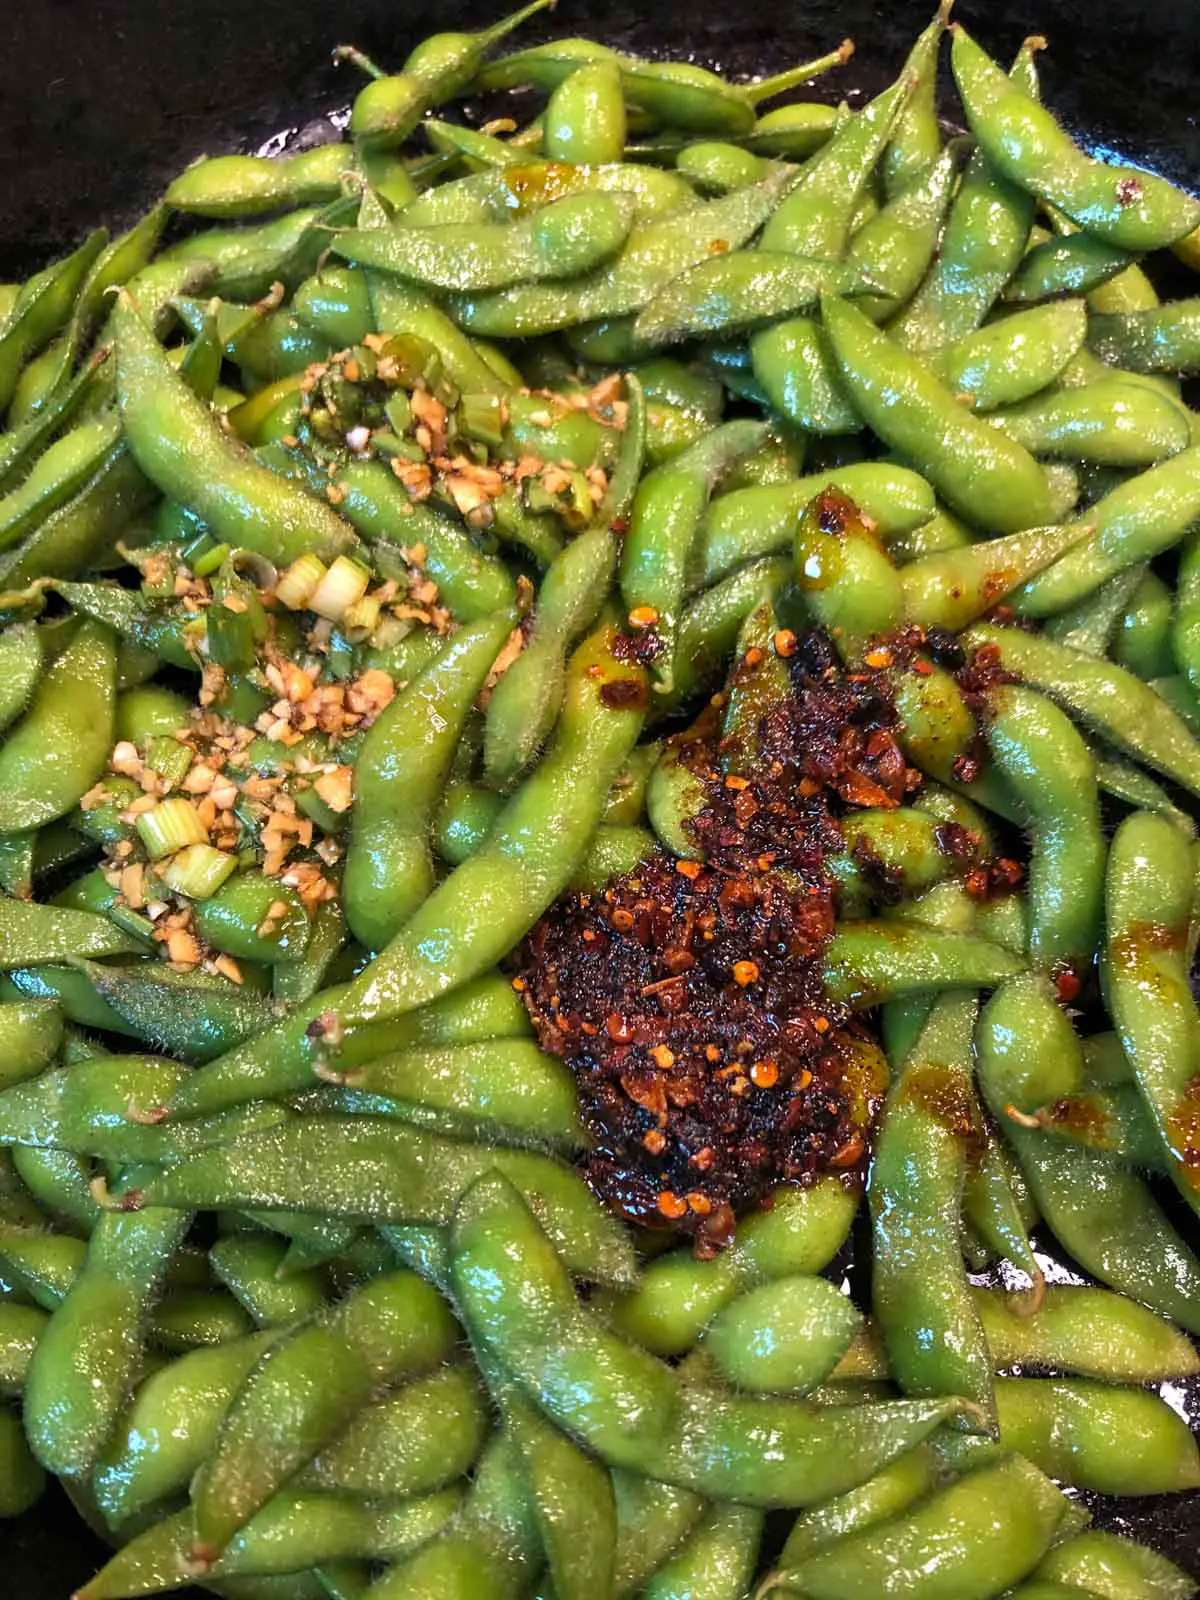 Edamame in their pods with a spicy chili oil on top as well as a ginger sauce with garlic and green onions poured onto the edamame.